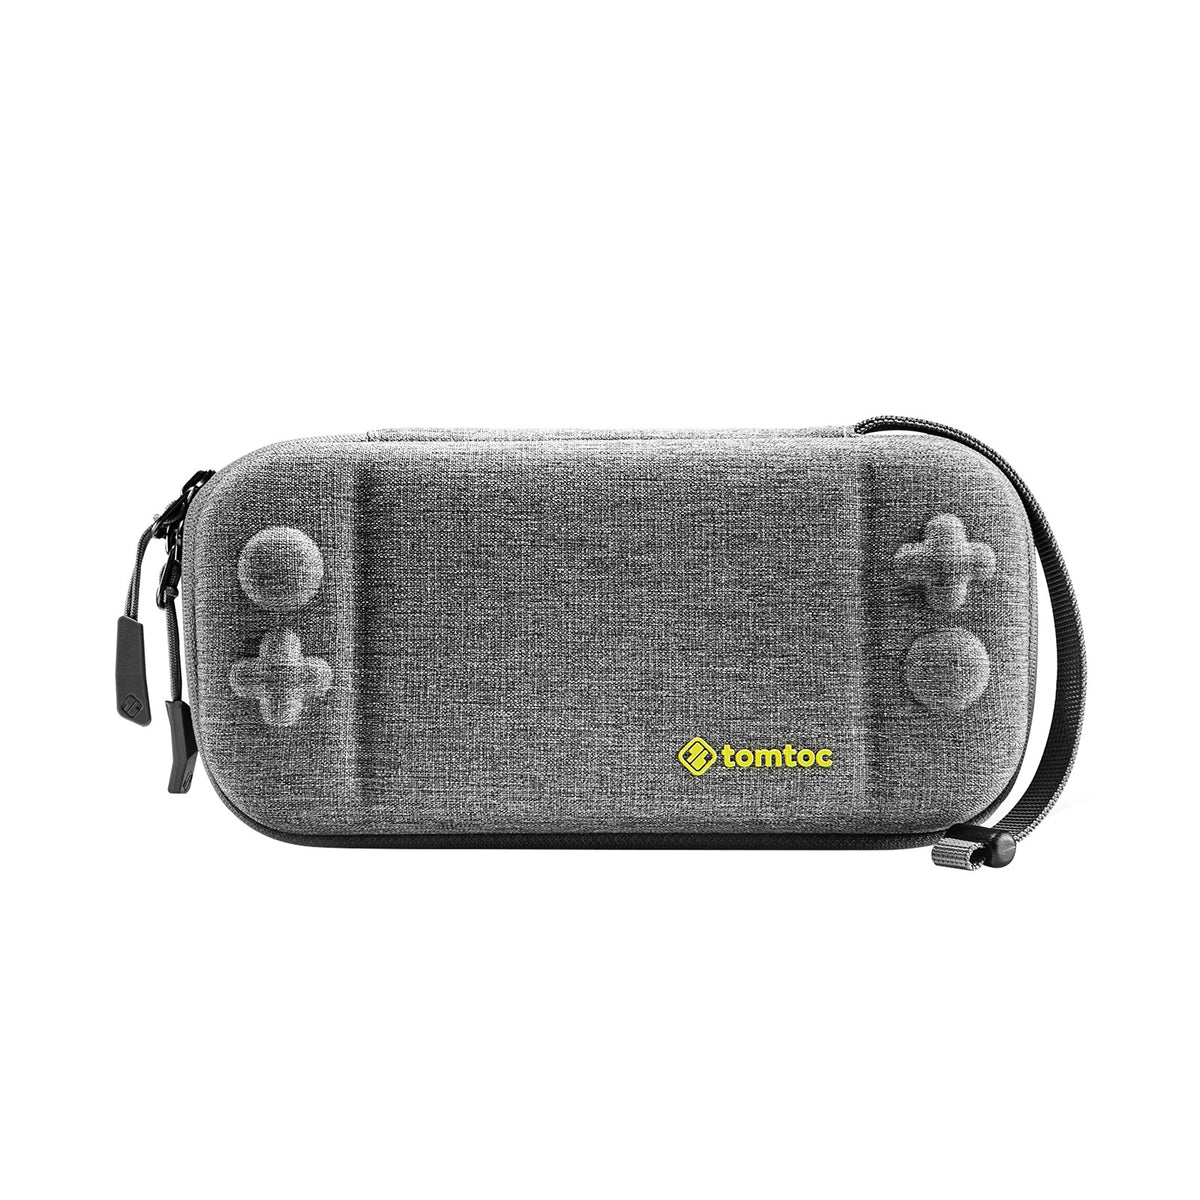 primary_tomtoc Carrying Case for Nintendo Switch Lite